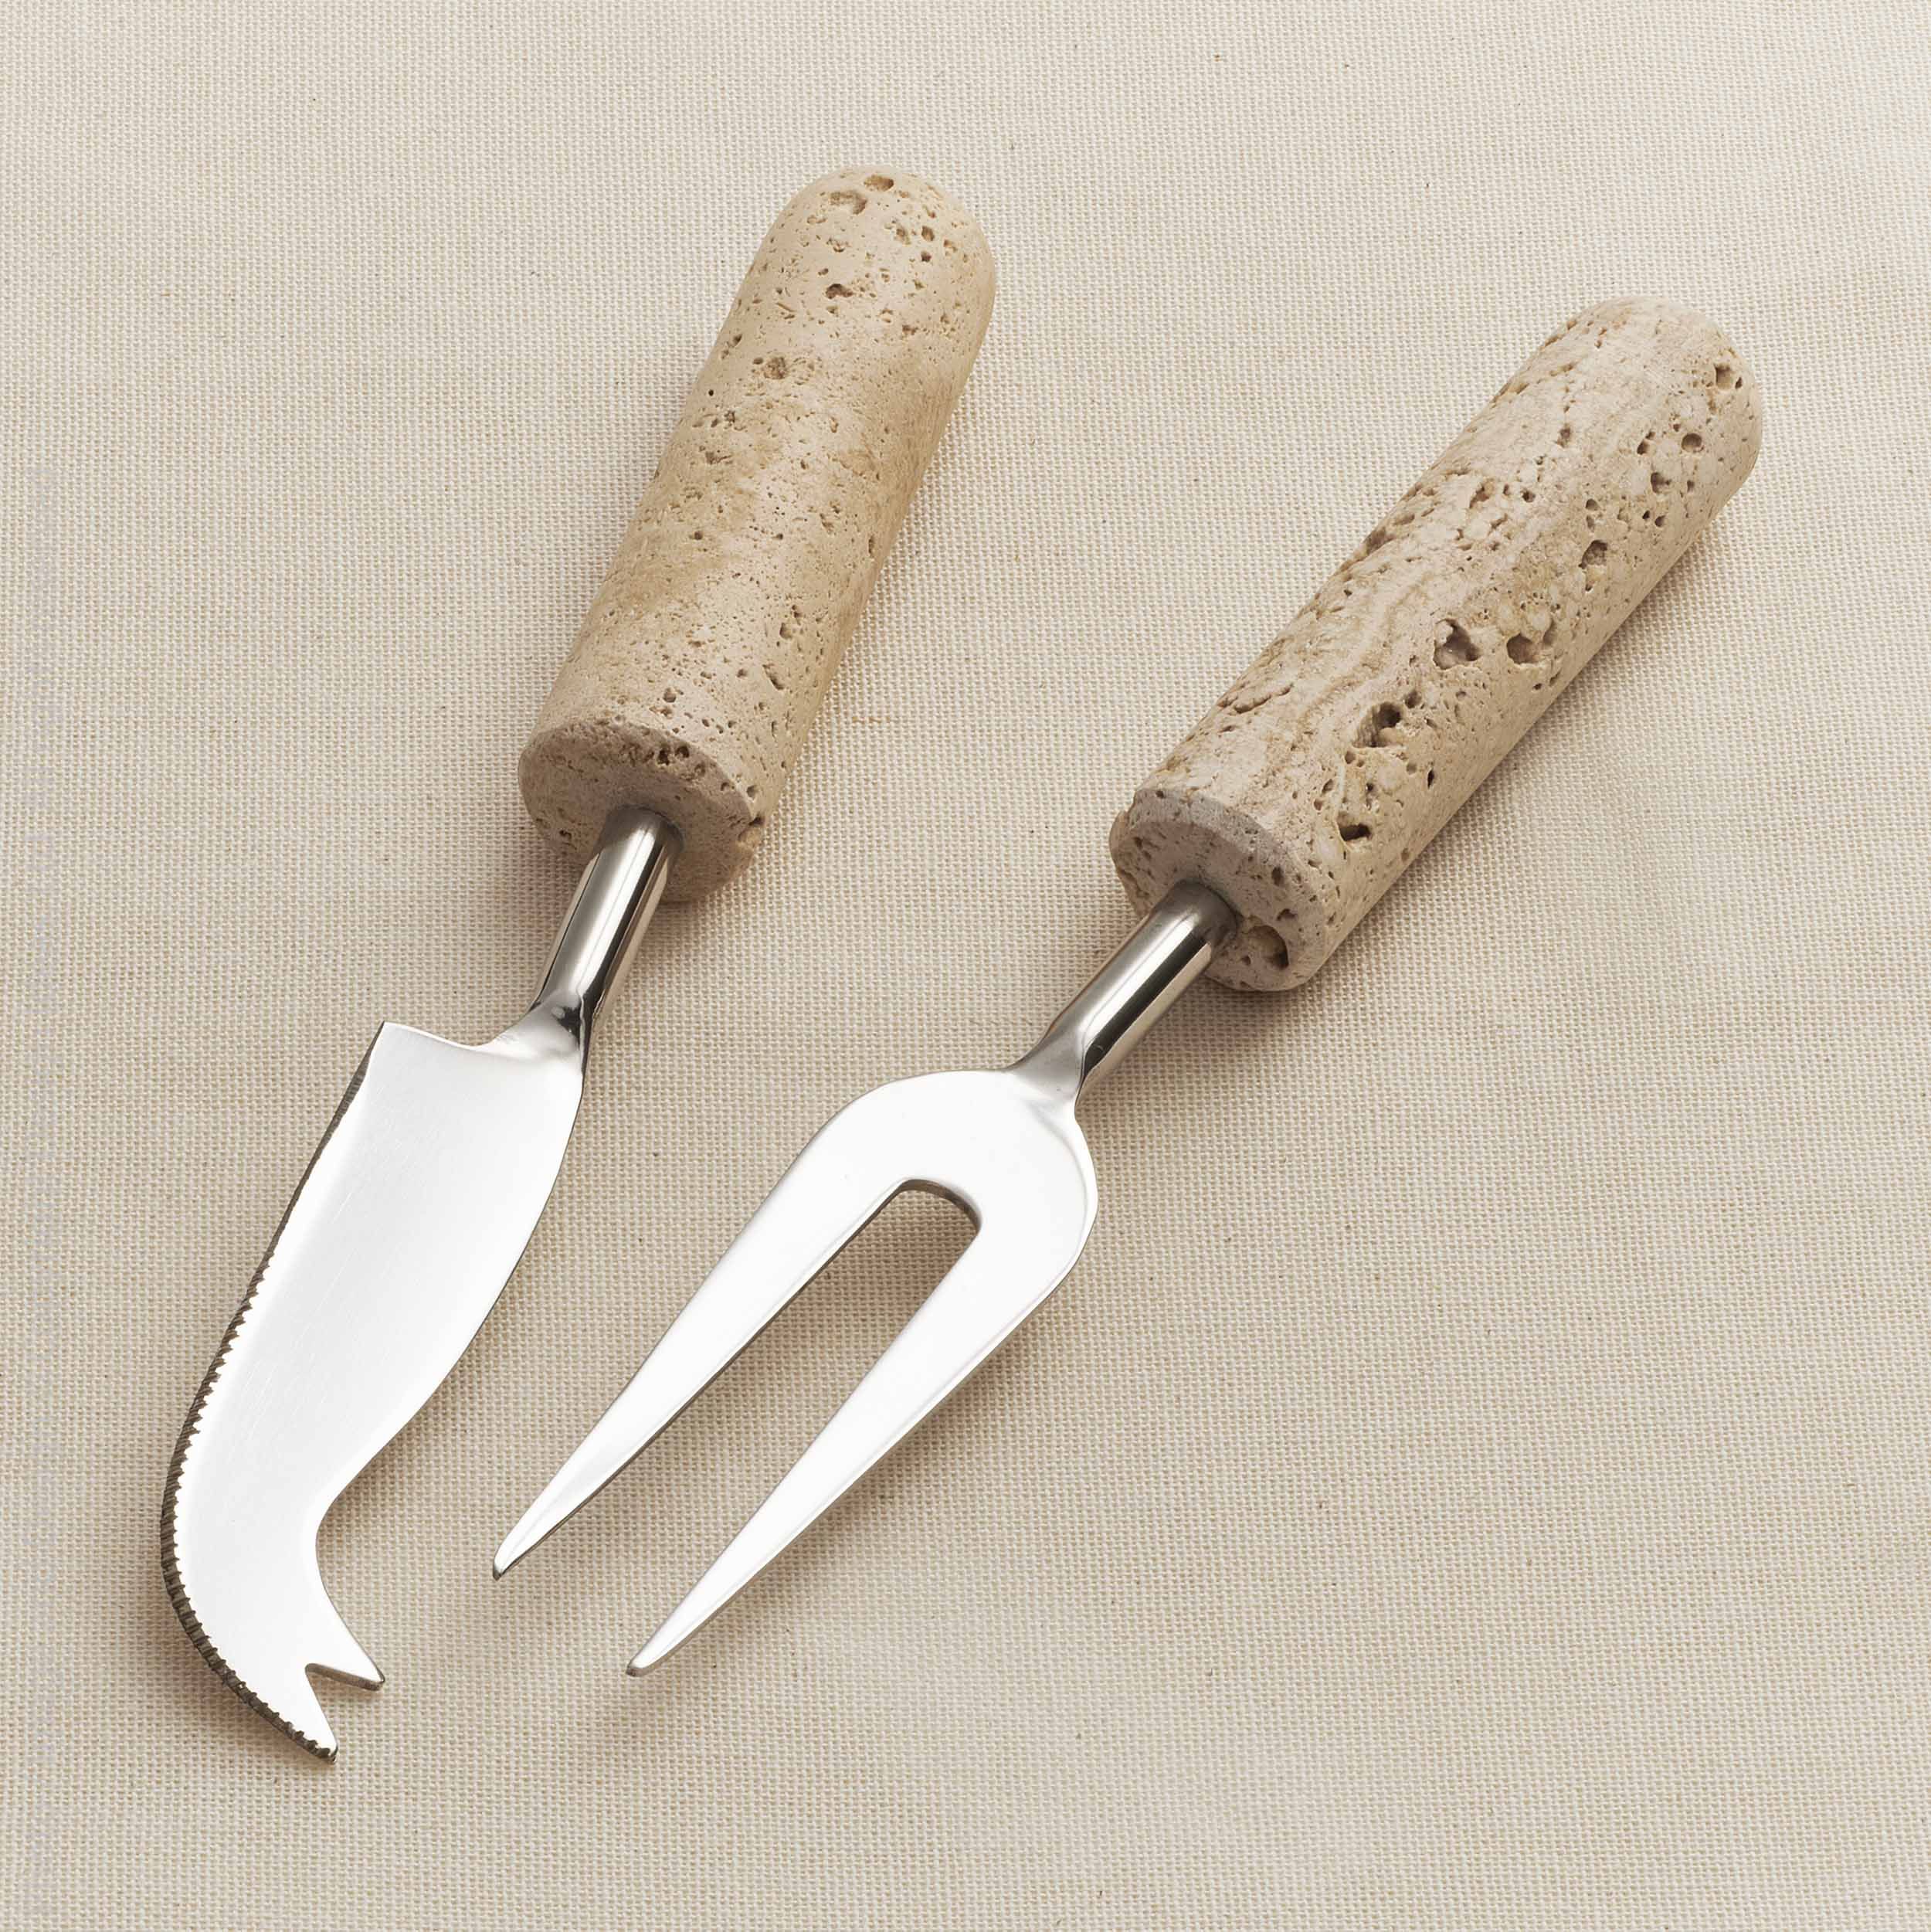 Marbella™ Hand Crafted Metal and Travertine Cheese Knives (set of 2) | Texxture Home